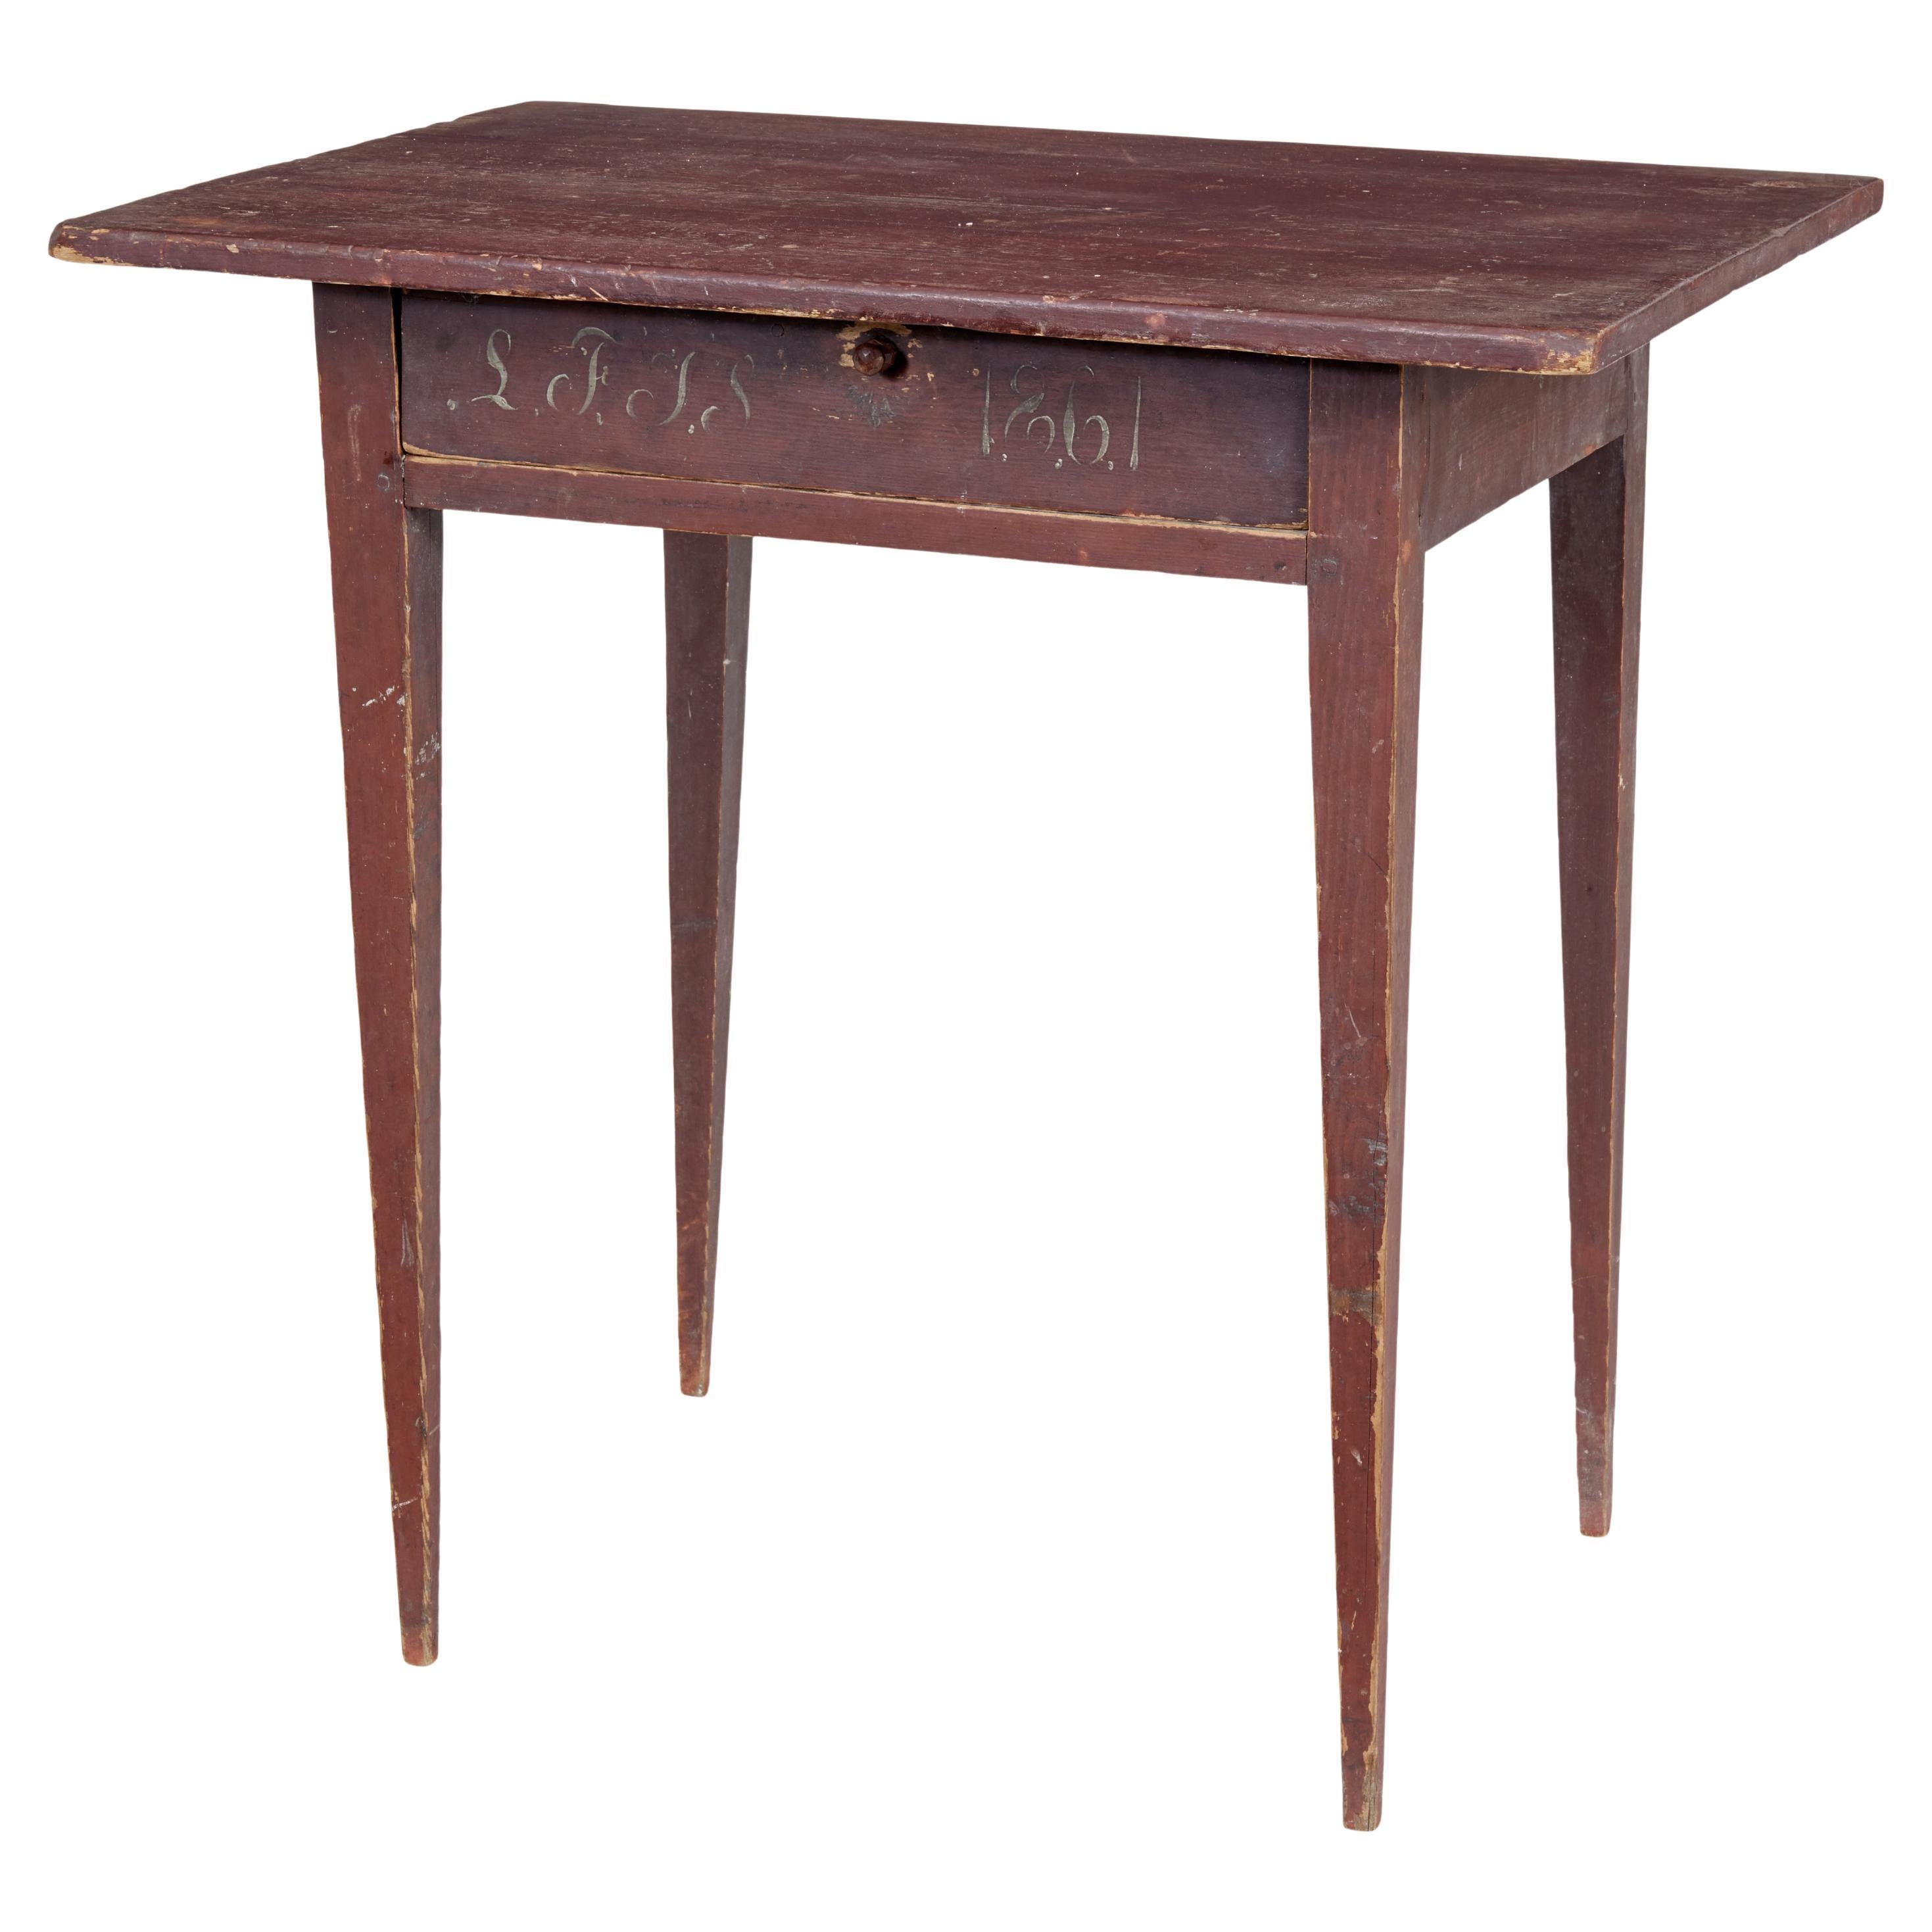 Swedish mid 19th century rustic painted pine side table